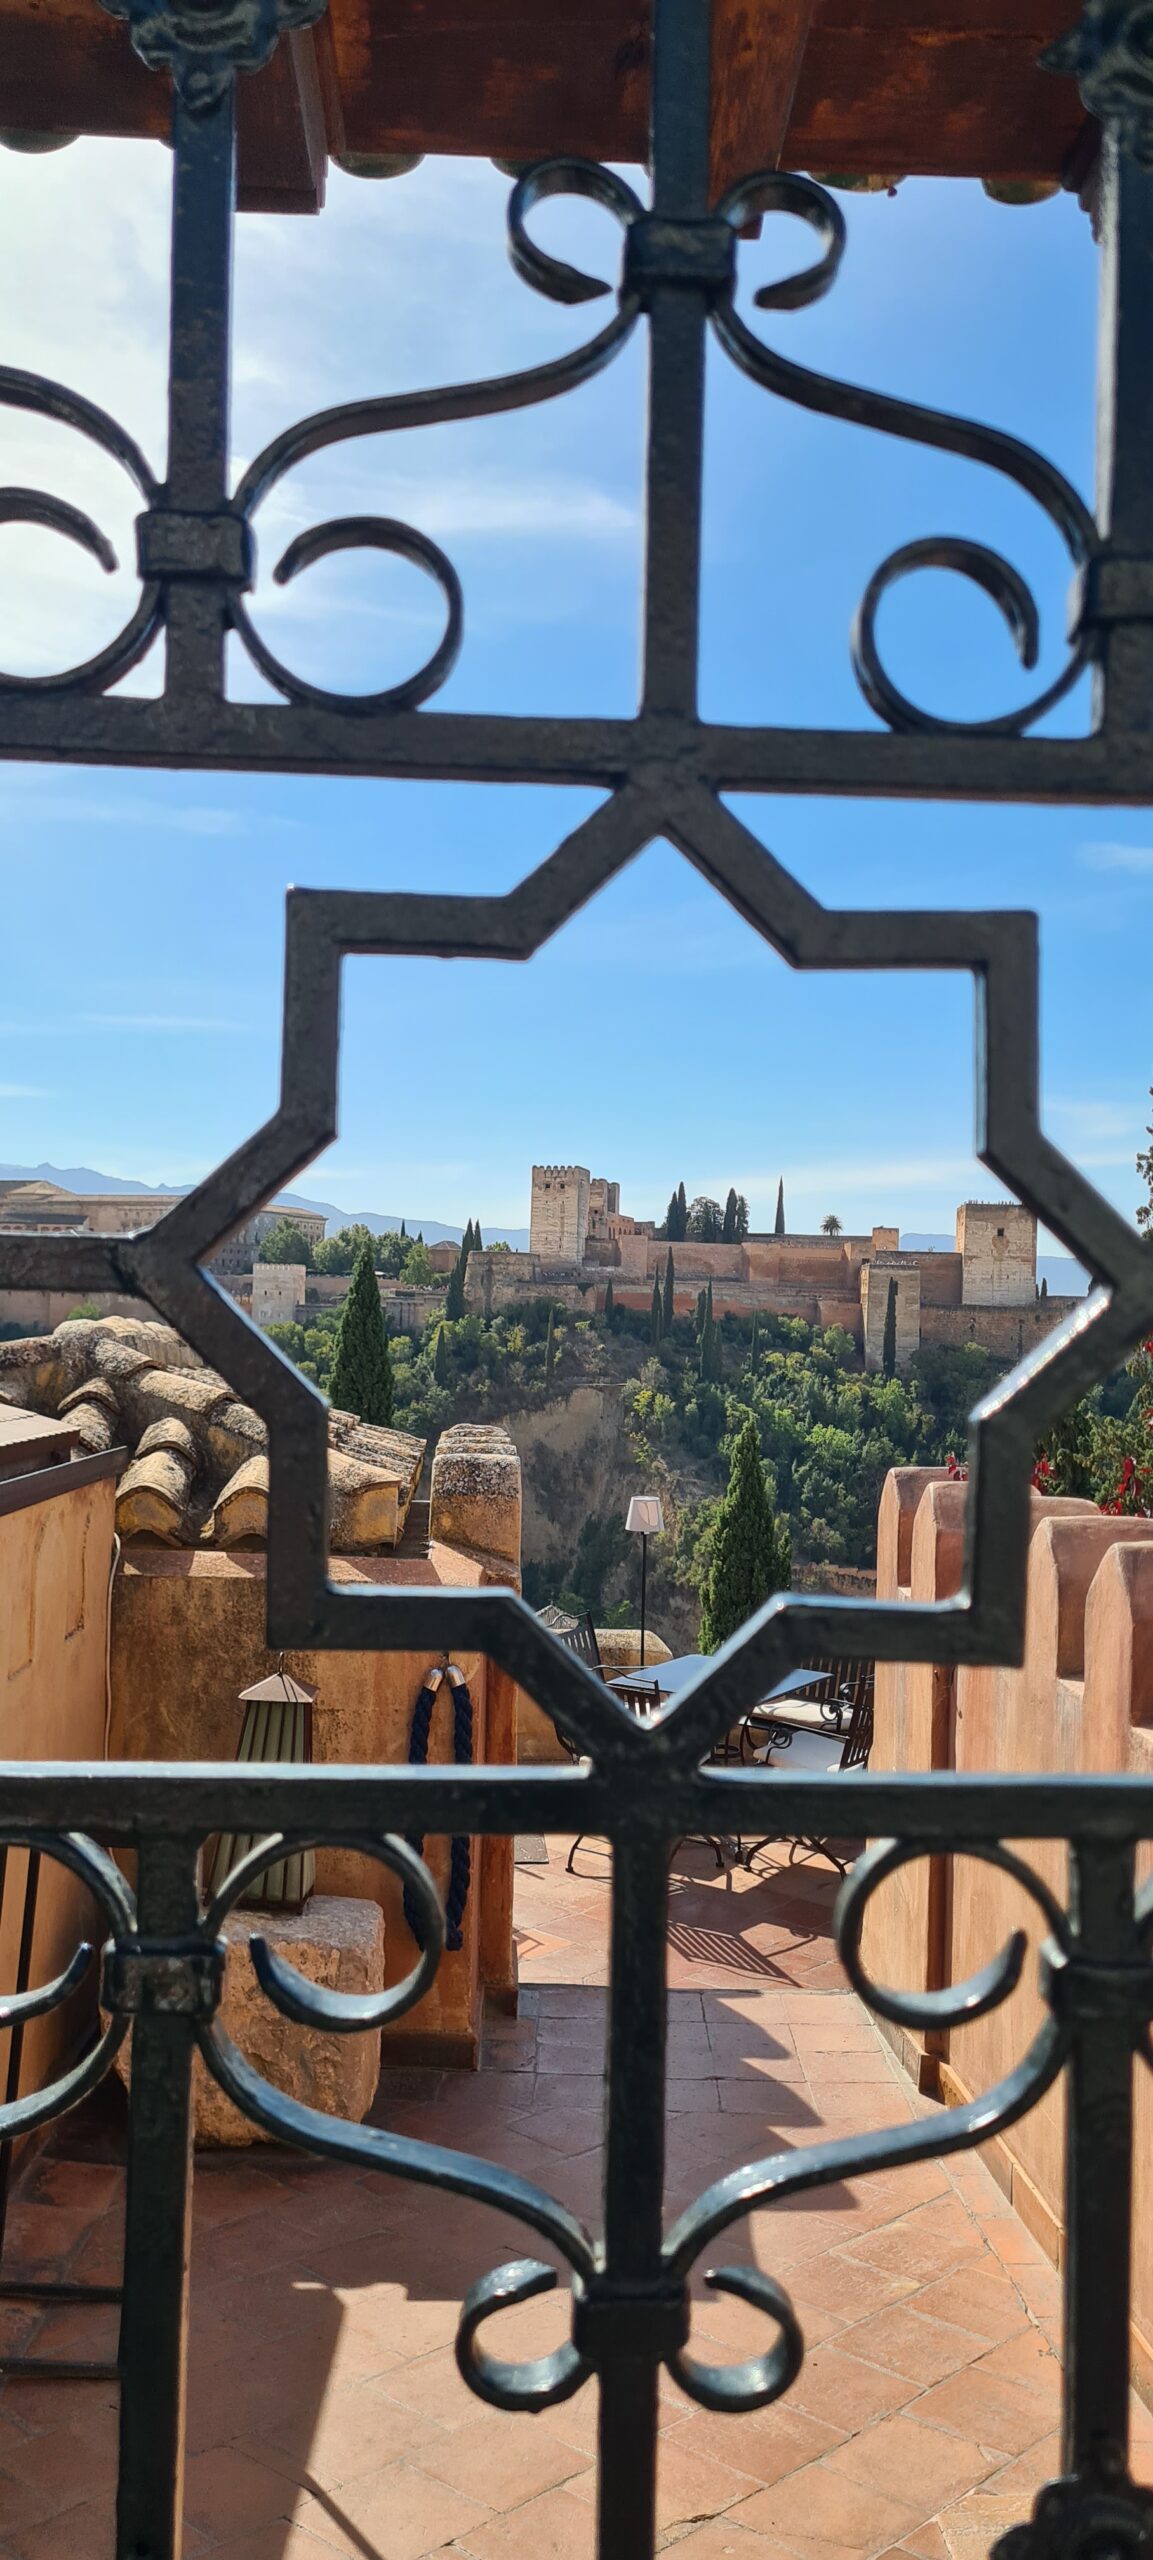 A view of the Alhambra from outside